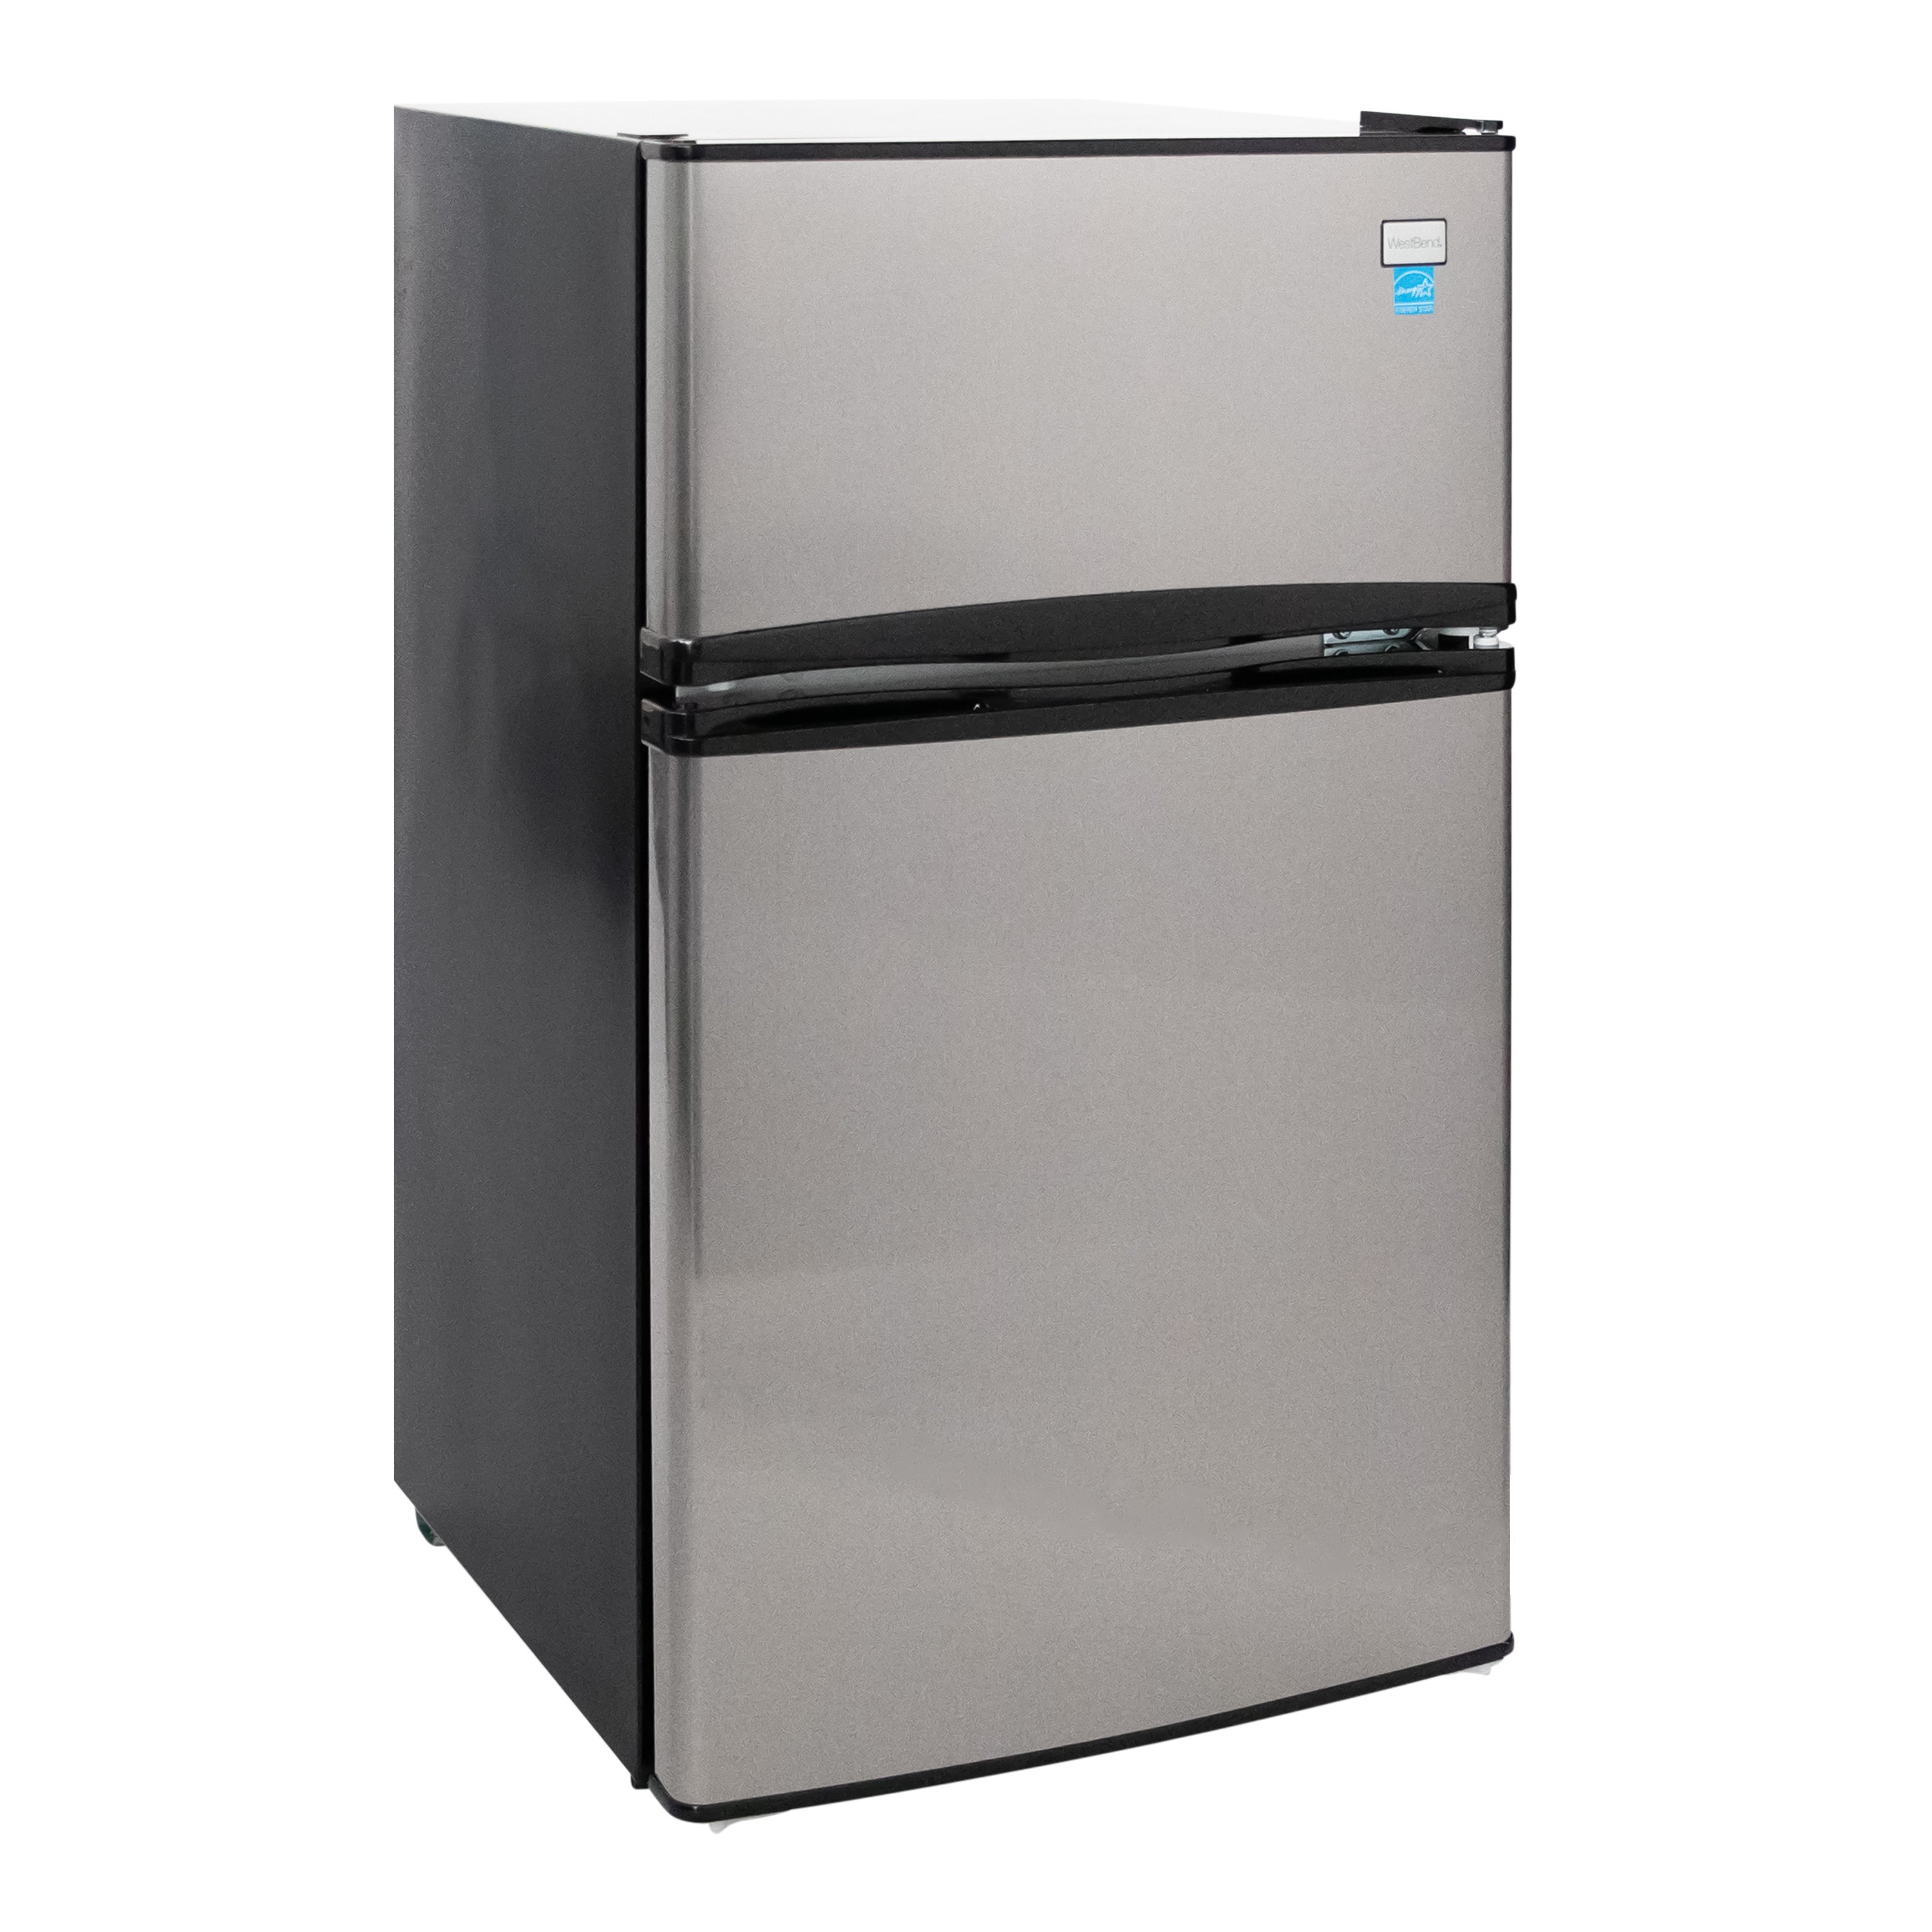 West Bend - WBRT31S, West Bend 3.1 cu. ft. Undercounter Refrigerator, in Stainless Steel